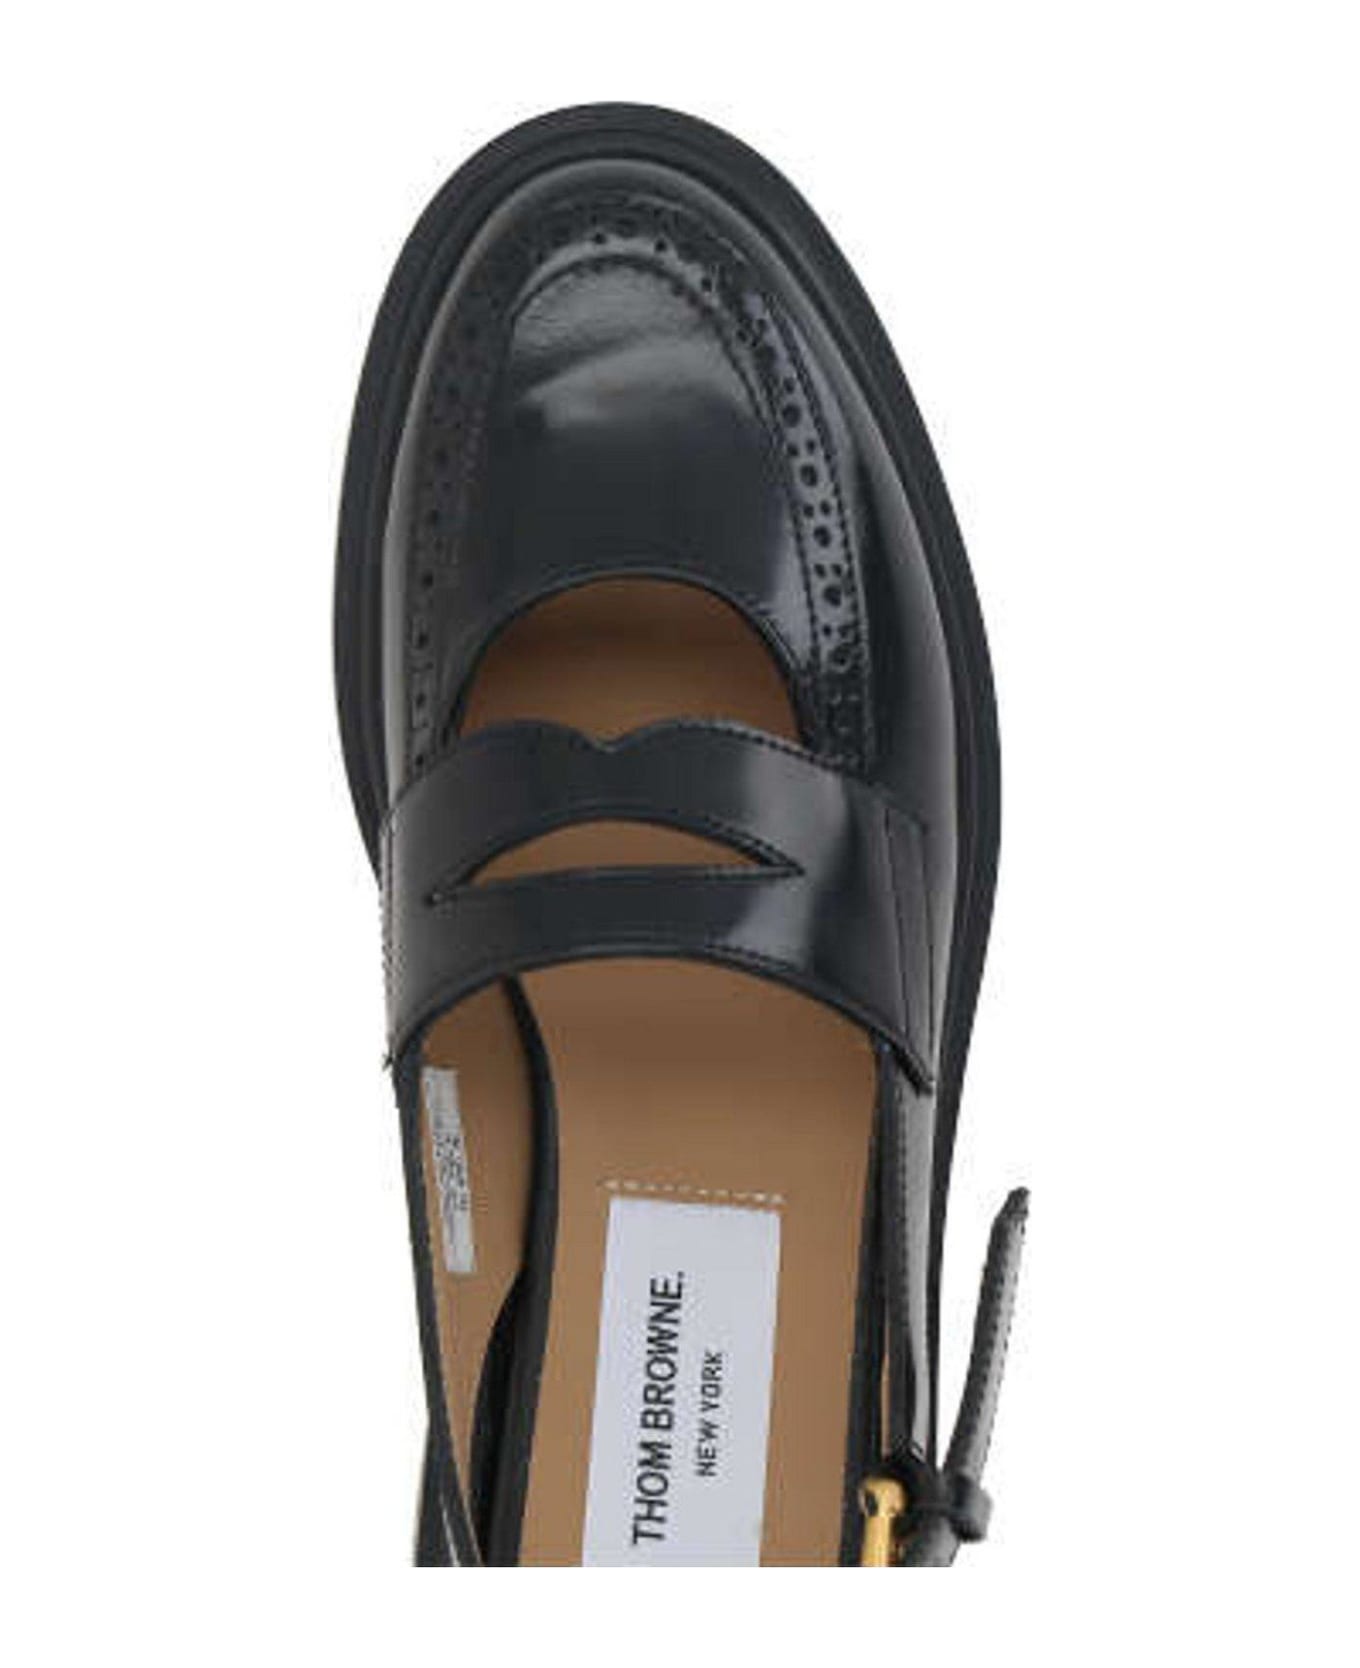 Thom Browne Cut Out Detailed Slingback Penny Loafers - Black フラットシューズ